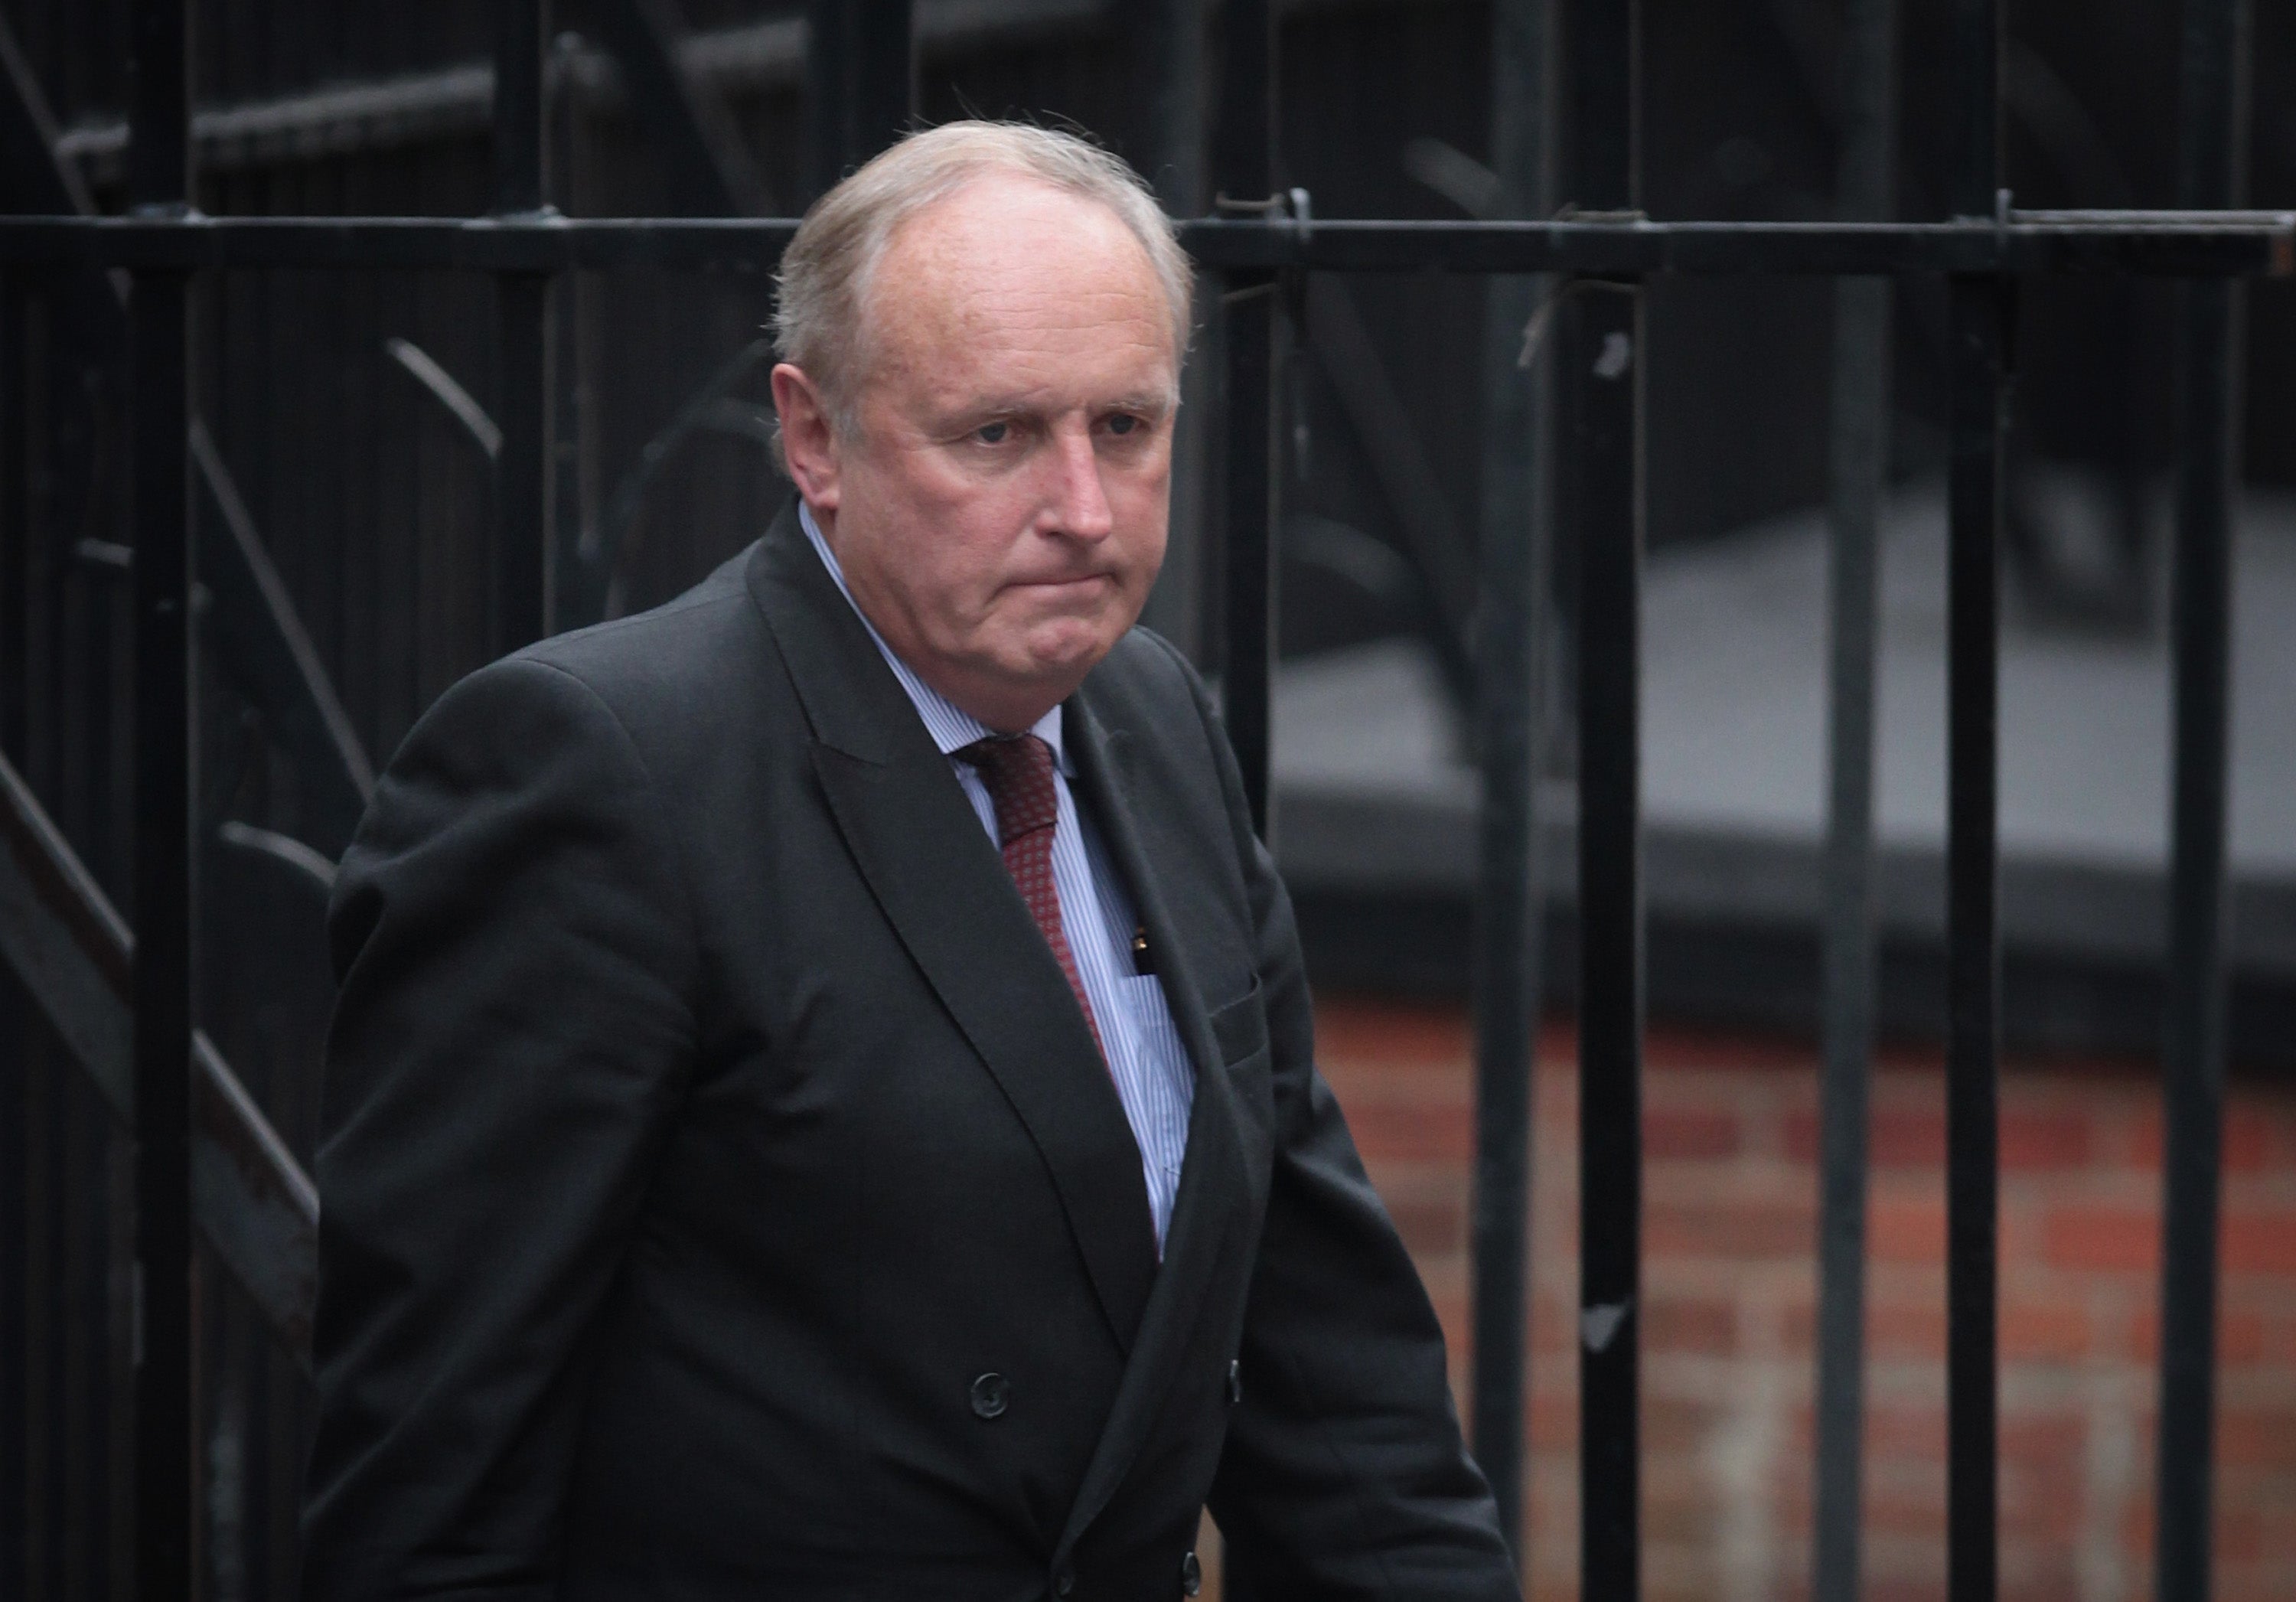 Paul Dacre, who edited the Daily Mail for 26 years